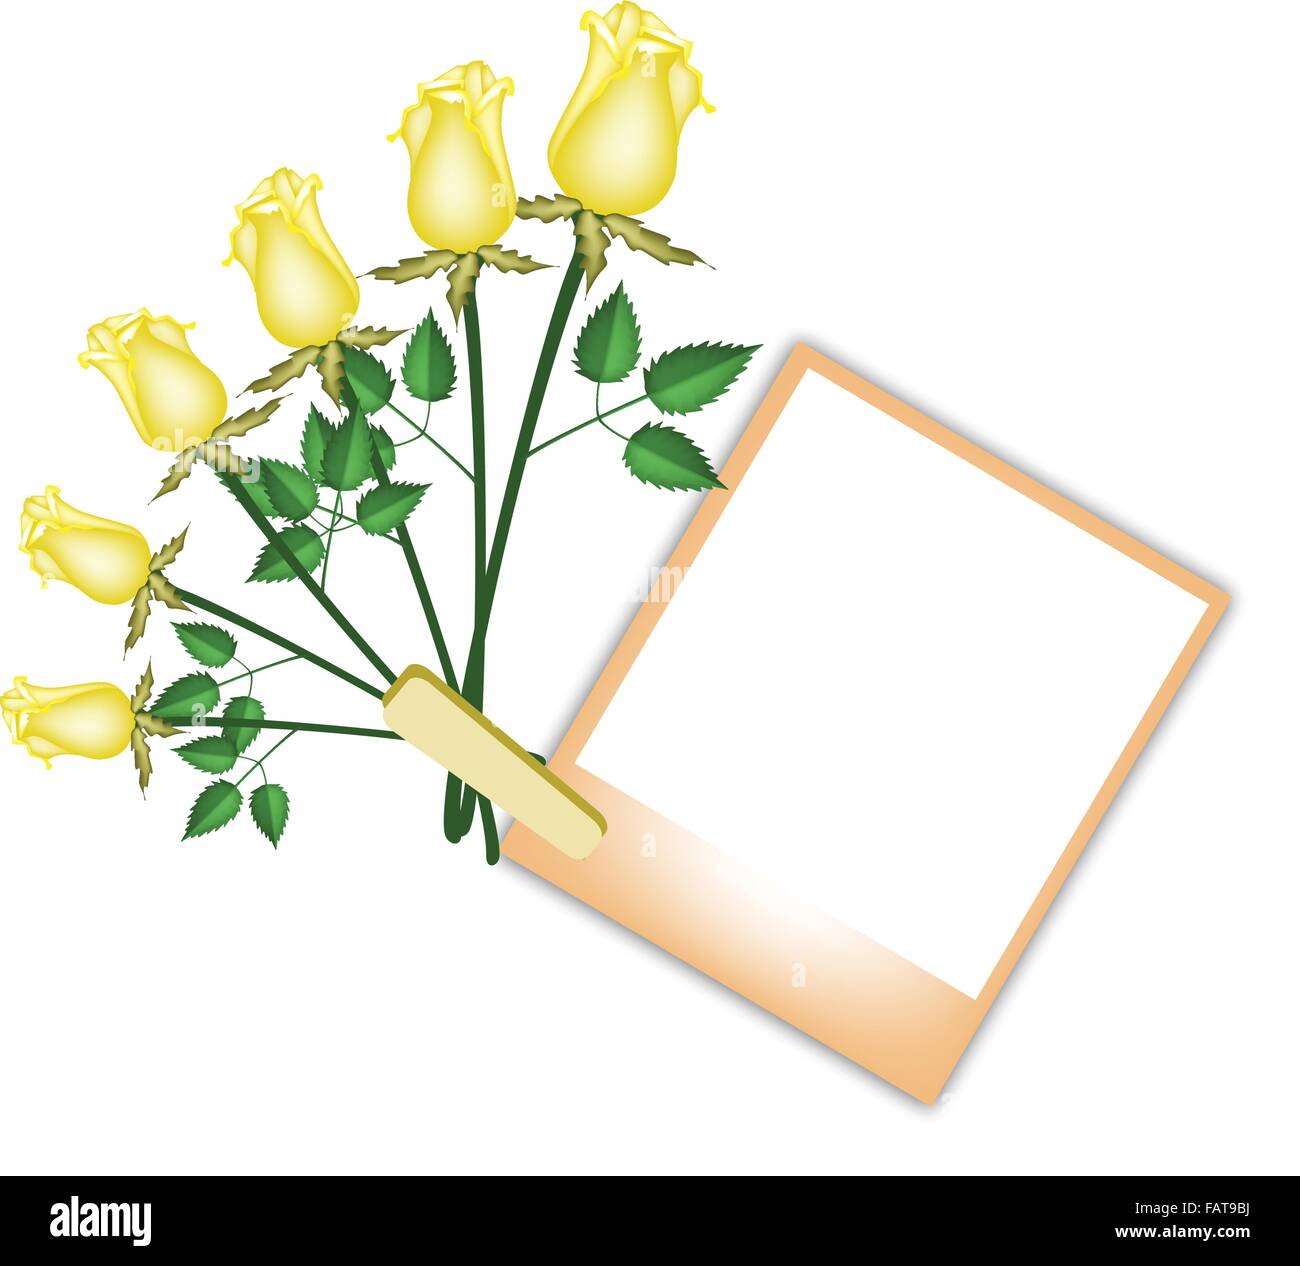 Love and Friendship Concept, Illustration of Six Lovely Yellow Roses with Blank Instant Photo Prints or Polaroid Frames Isolated Stock Vector